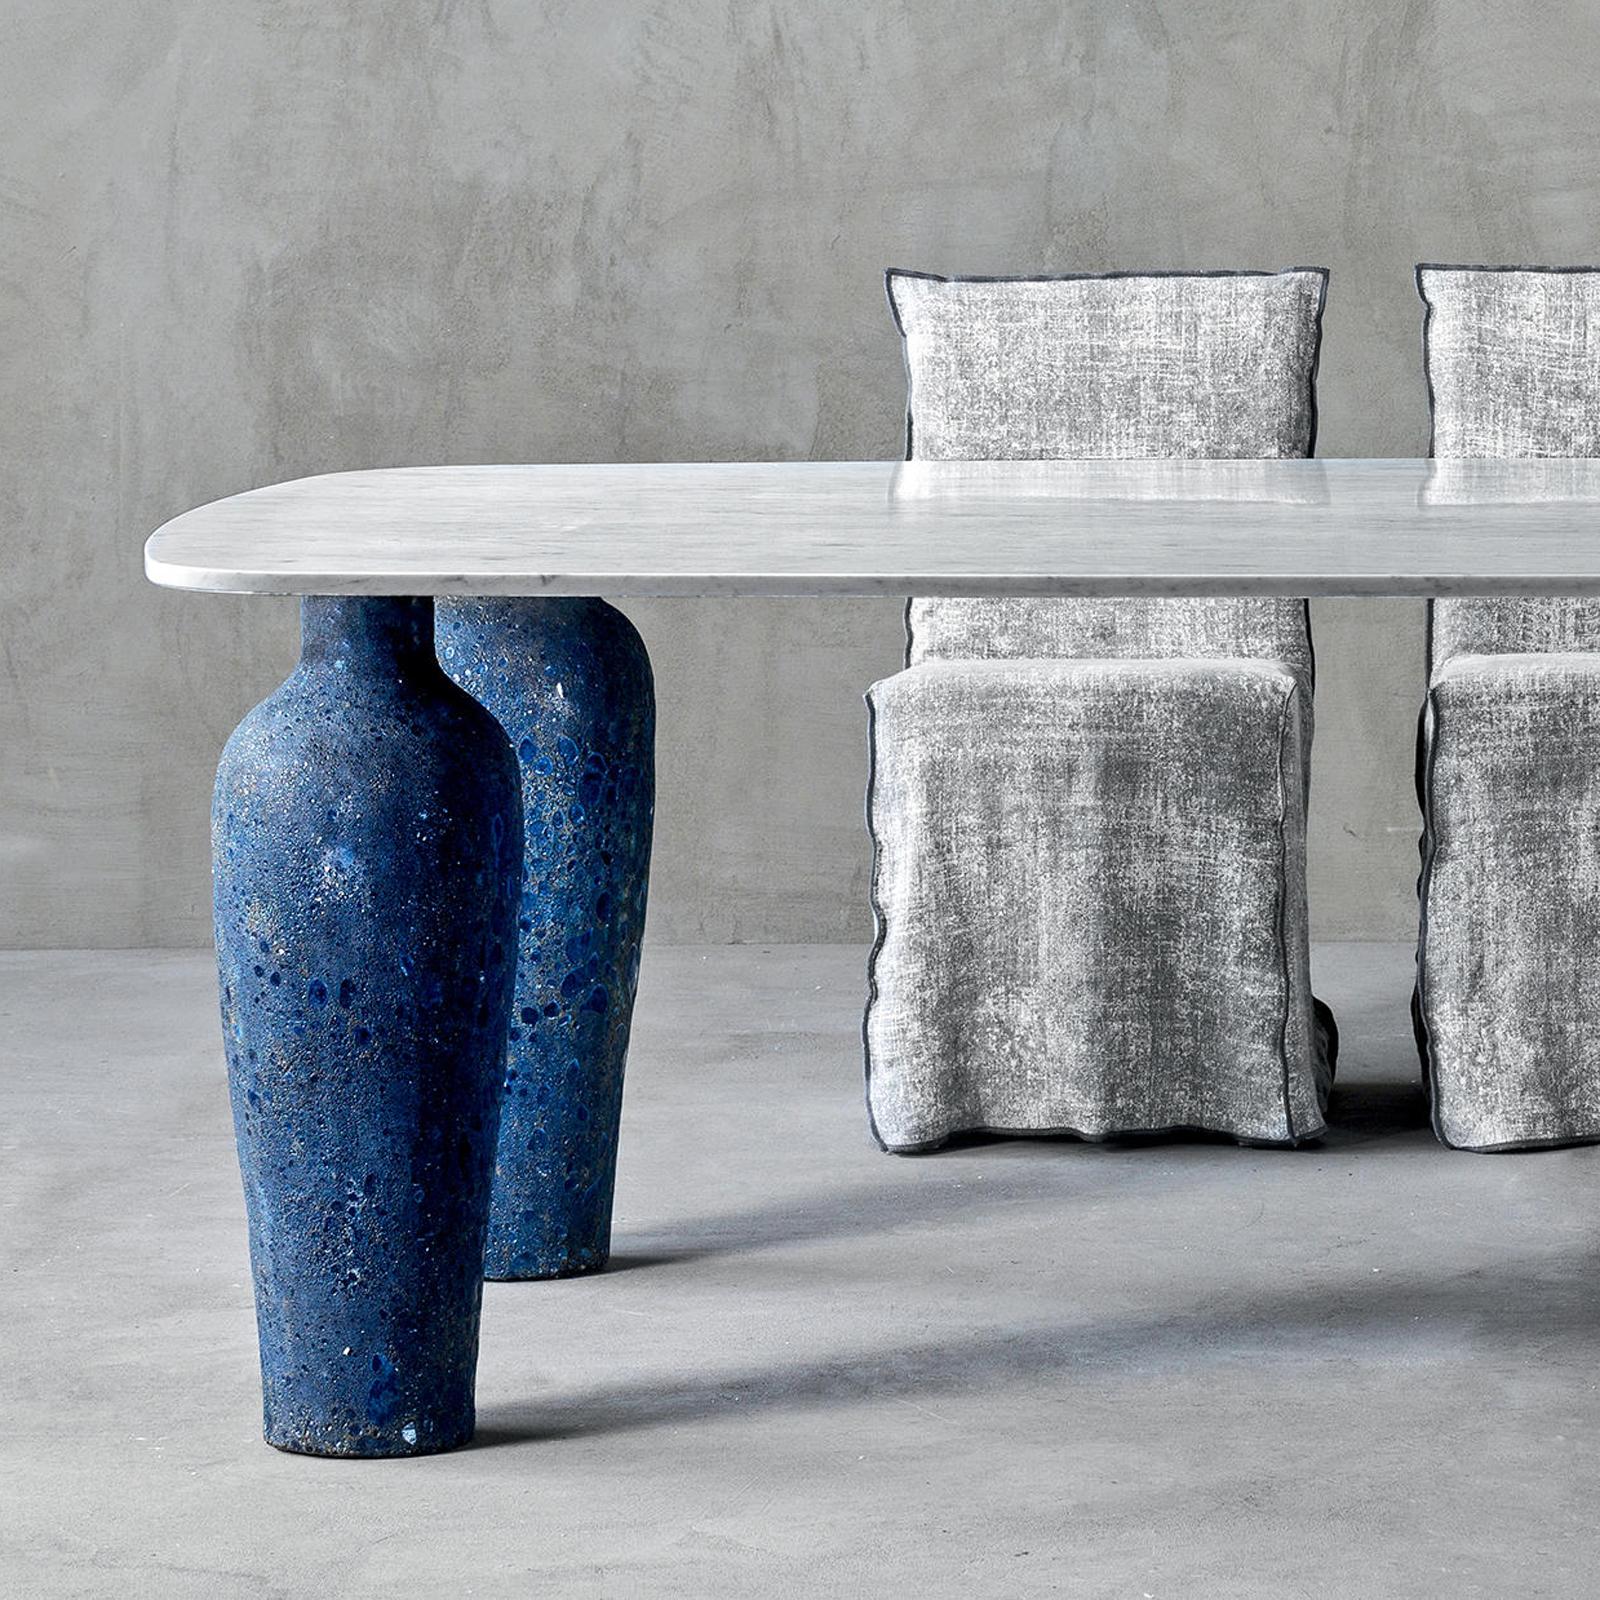 Dining table blue ceramic long with Carrara white and
grey marble top and with 4 vase feet in blue ceramic made
in Italy.